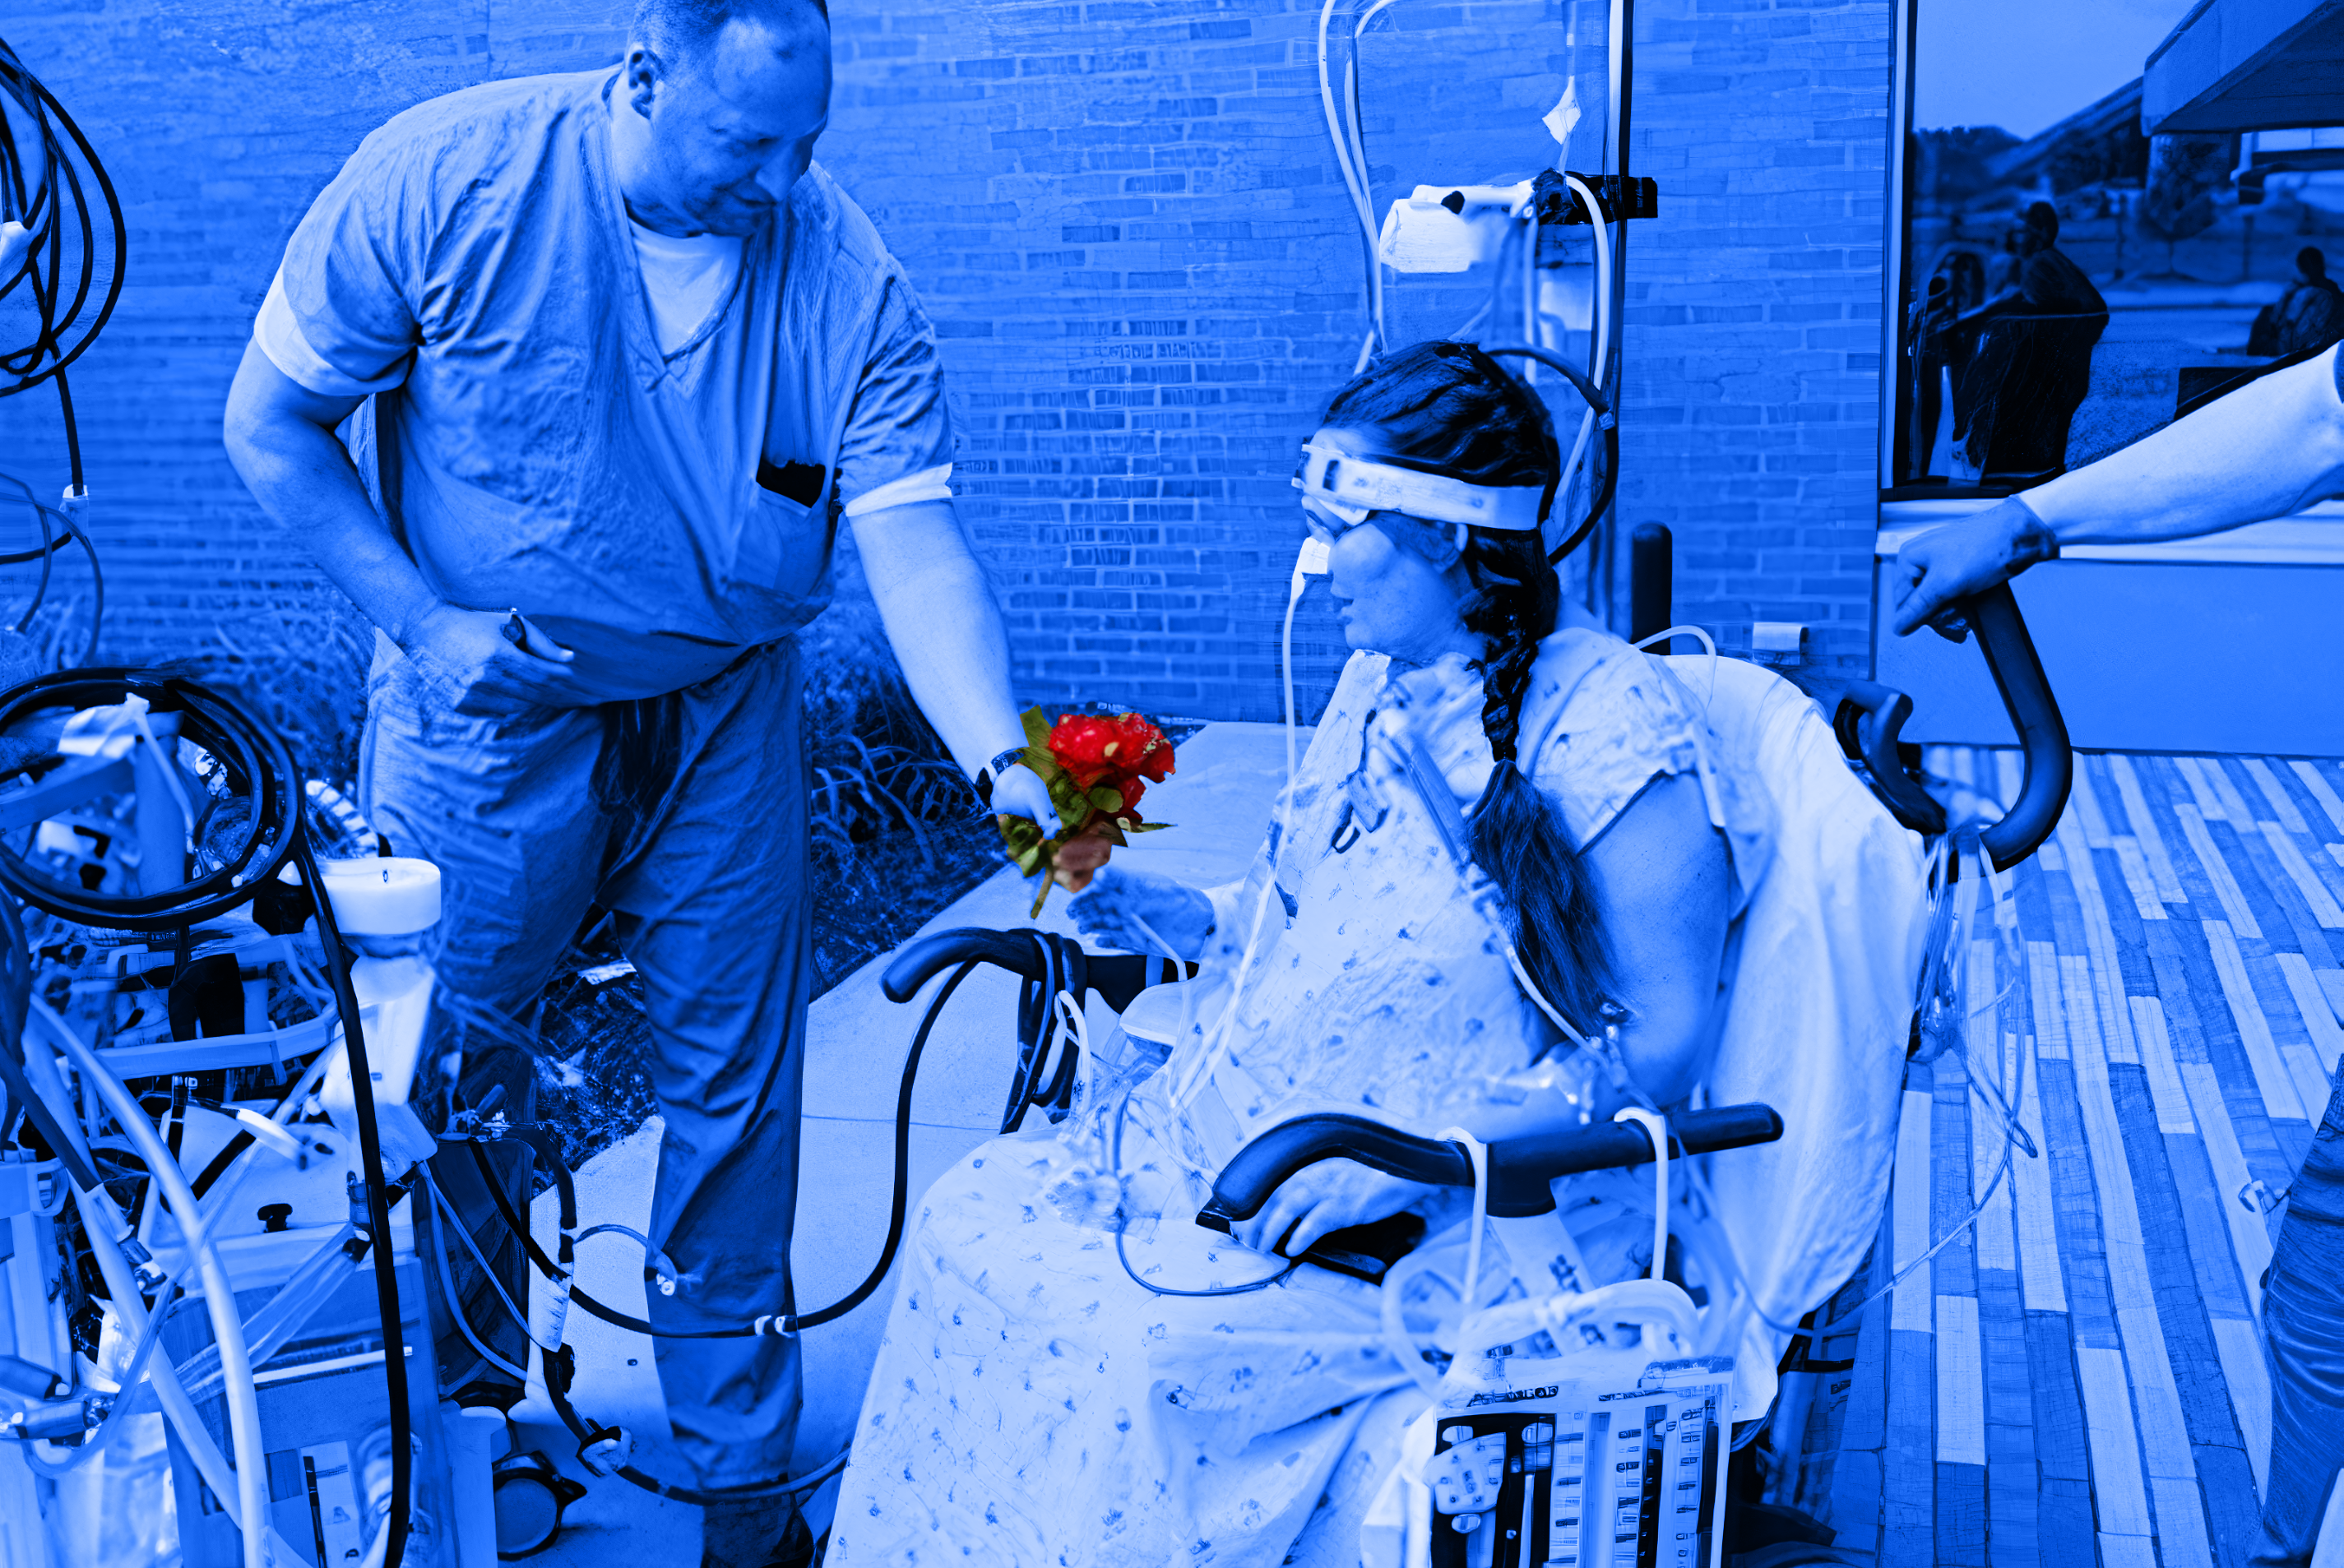 Perfusion Problems: Complications Associated with ECMO/ECLS